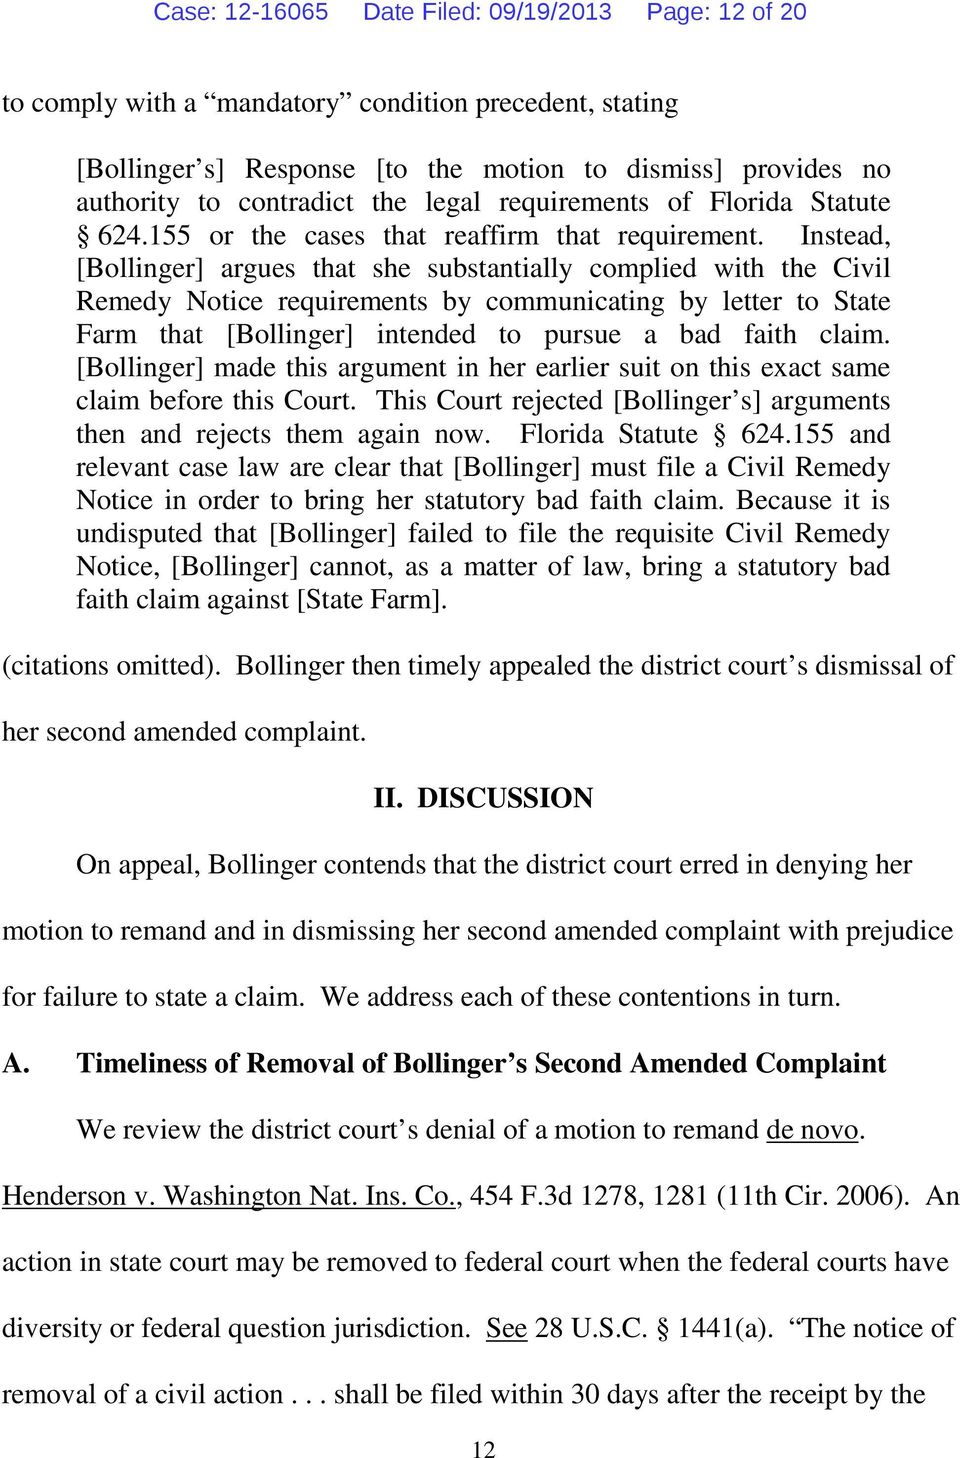 Instead, [Bollinger] argues that she substantially complied with the Civil Remedy Notice requirements by communicating by letter to State Farm that [Bollinger] intended to pursue a bad faith claim.